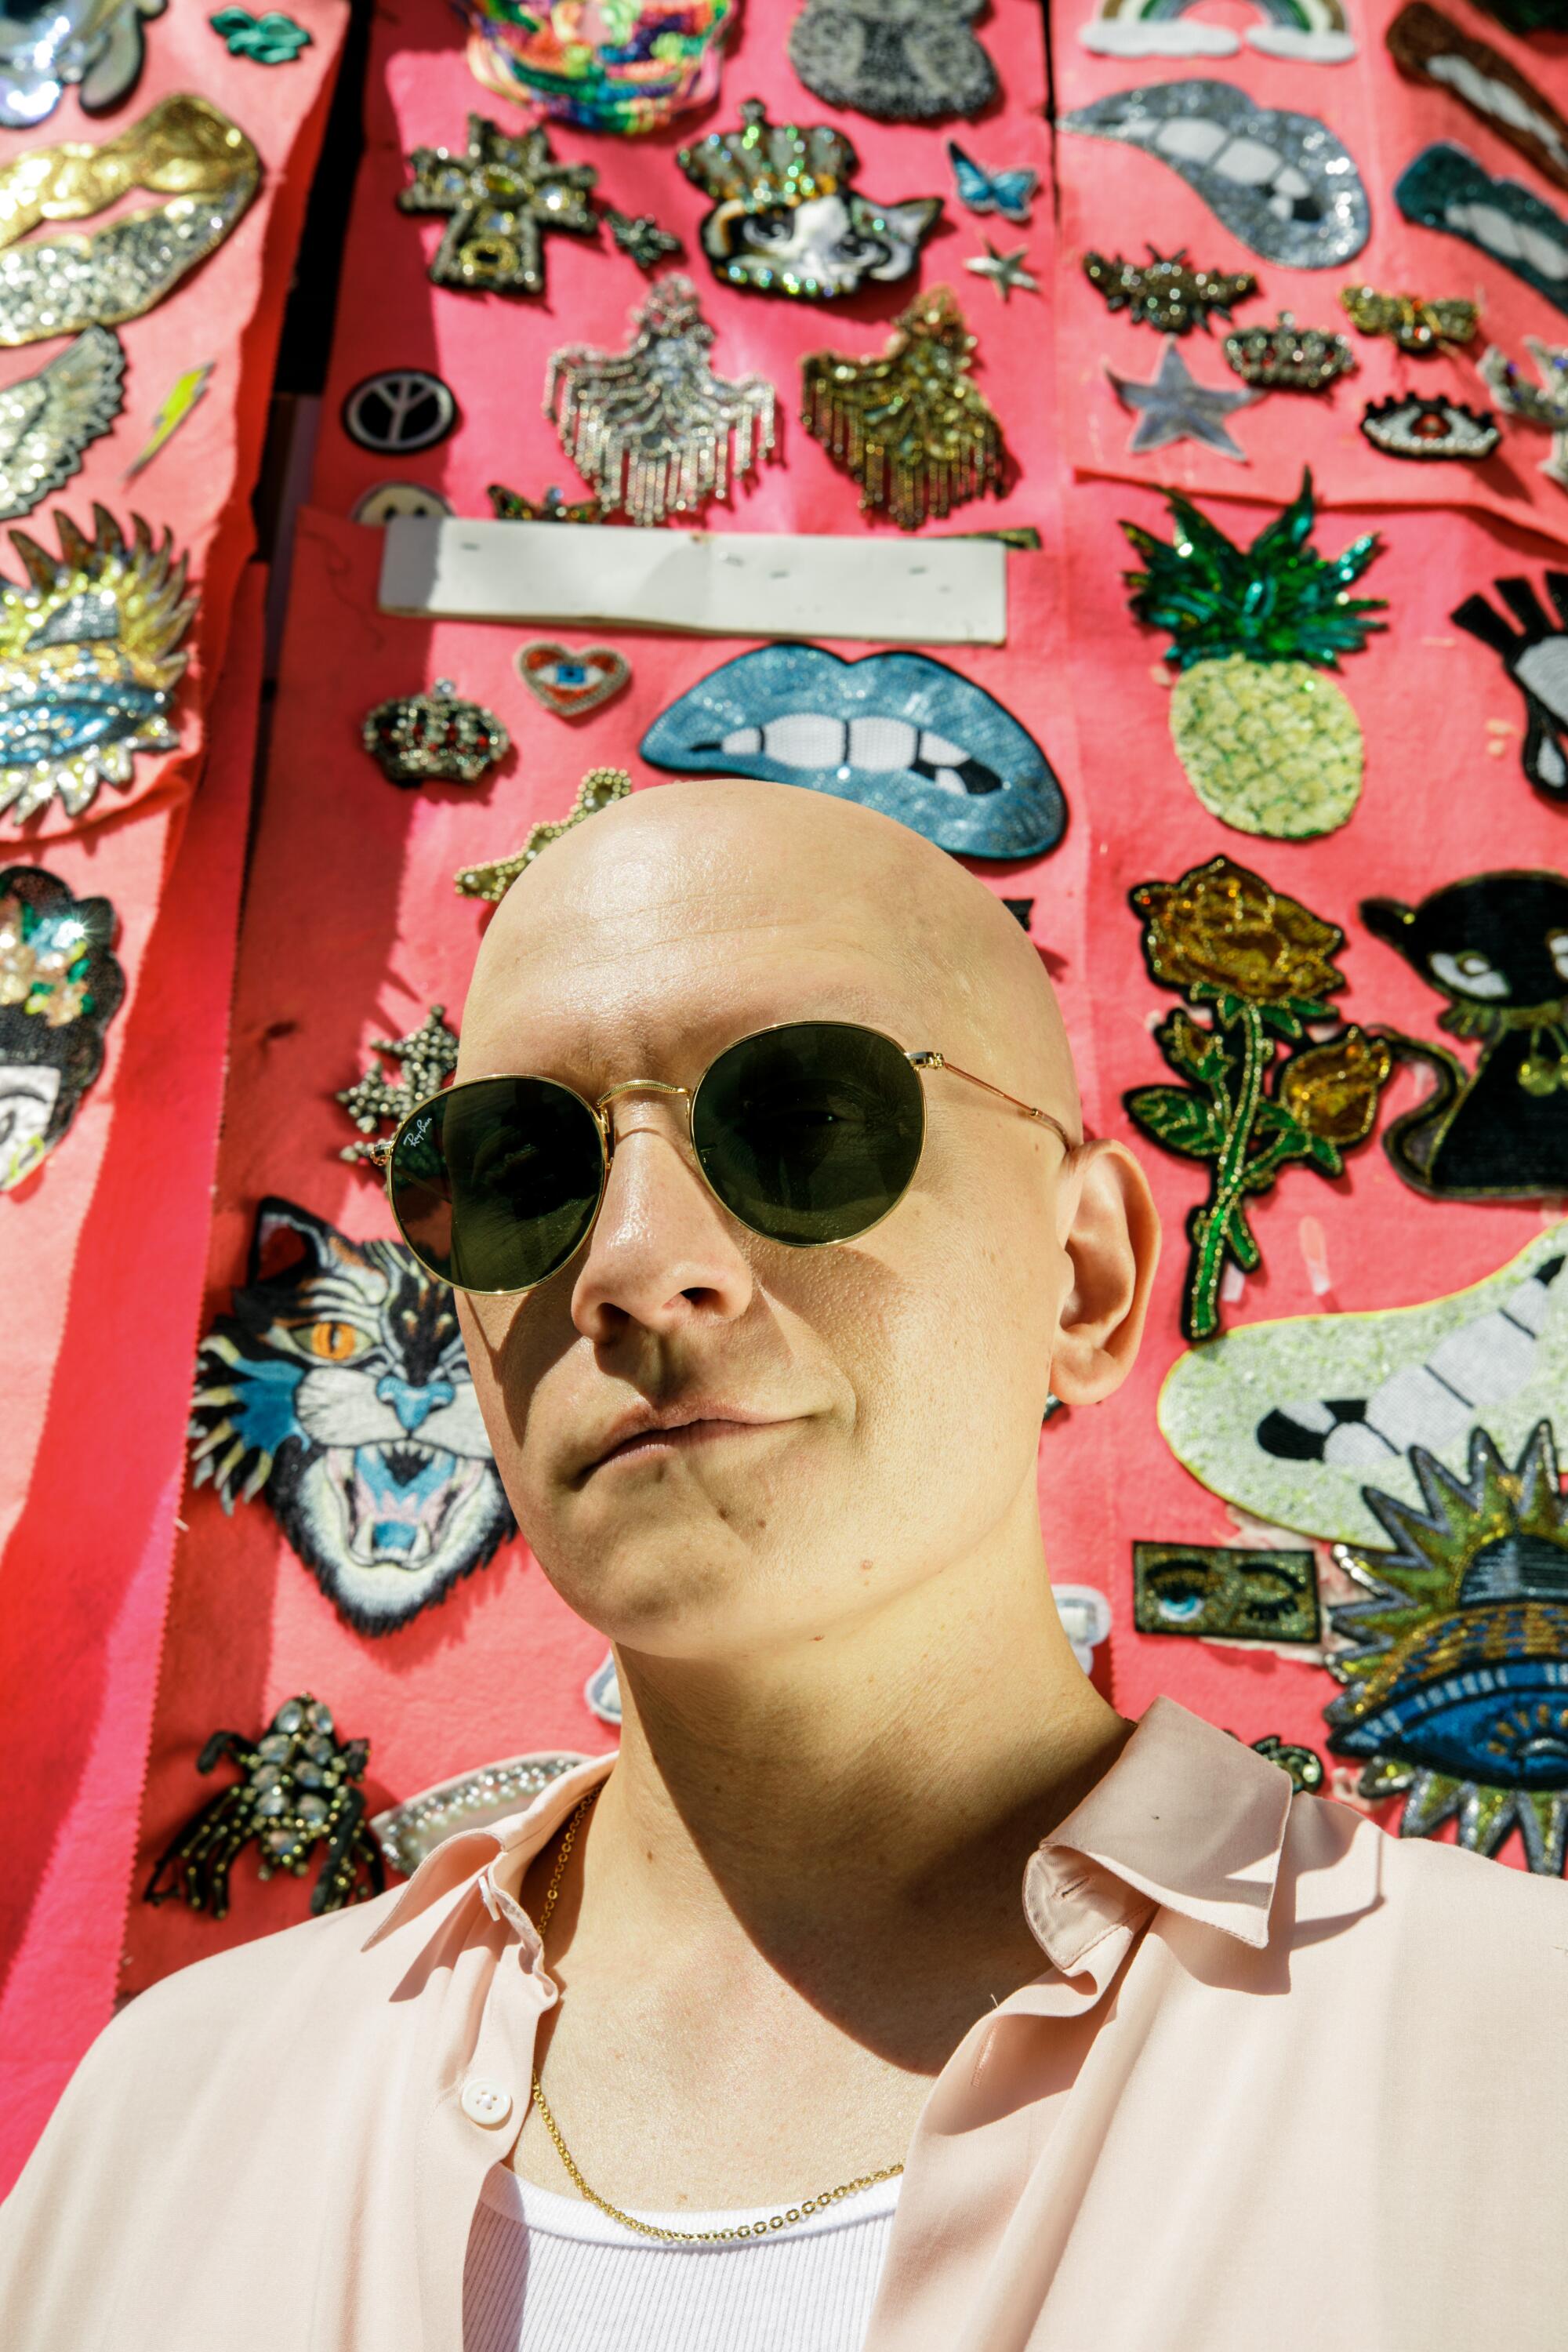 A man in sunglasses poses for a portrait in front of a stall selling patches.